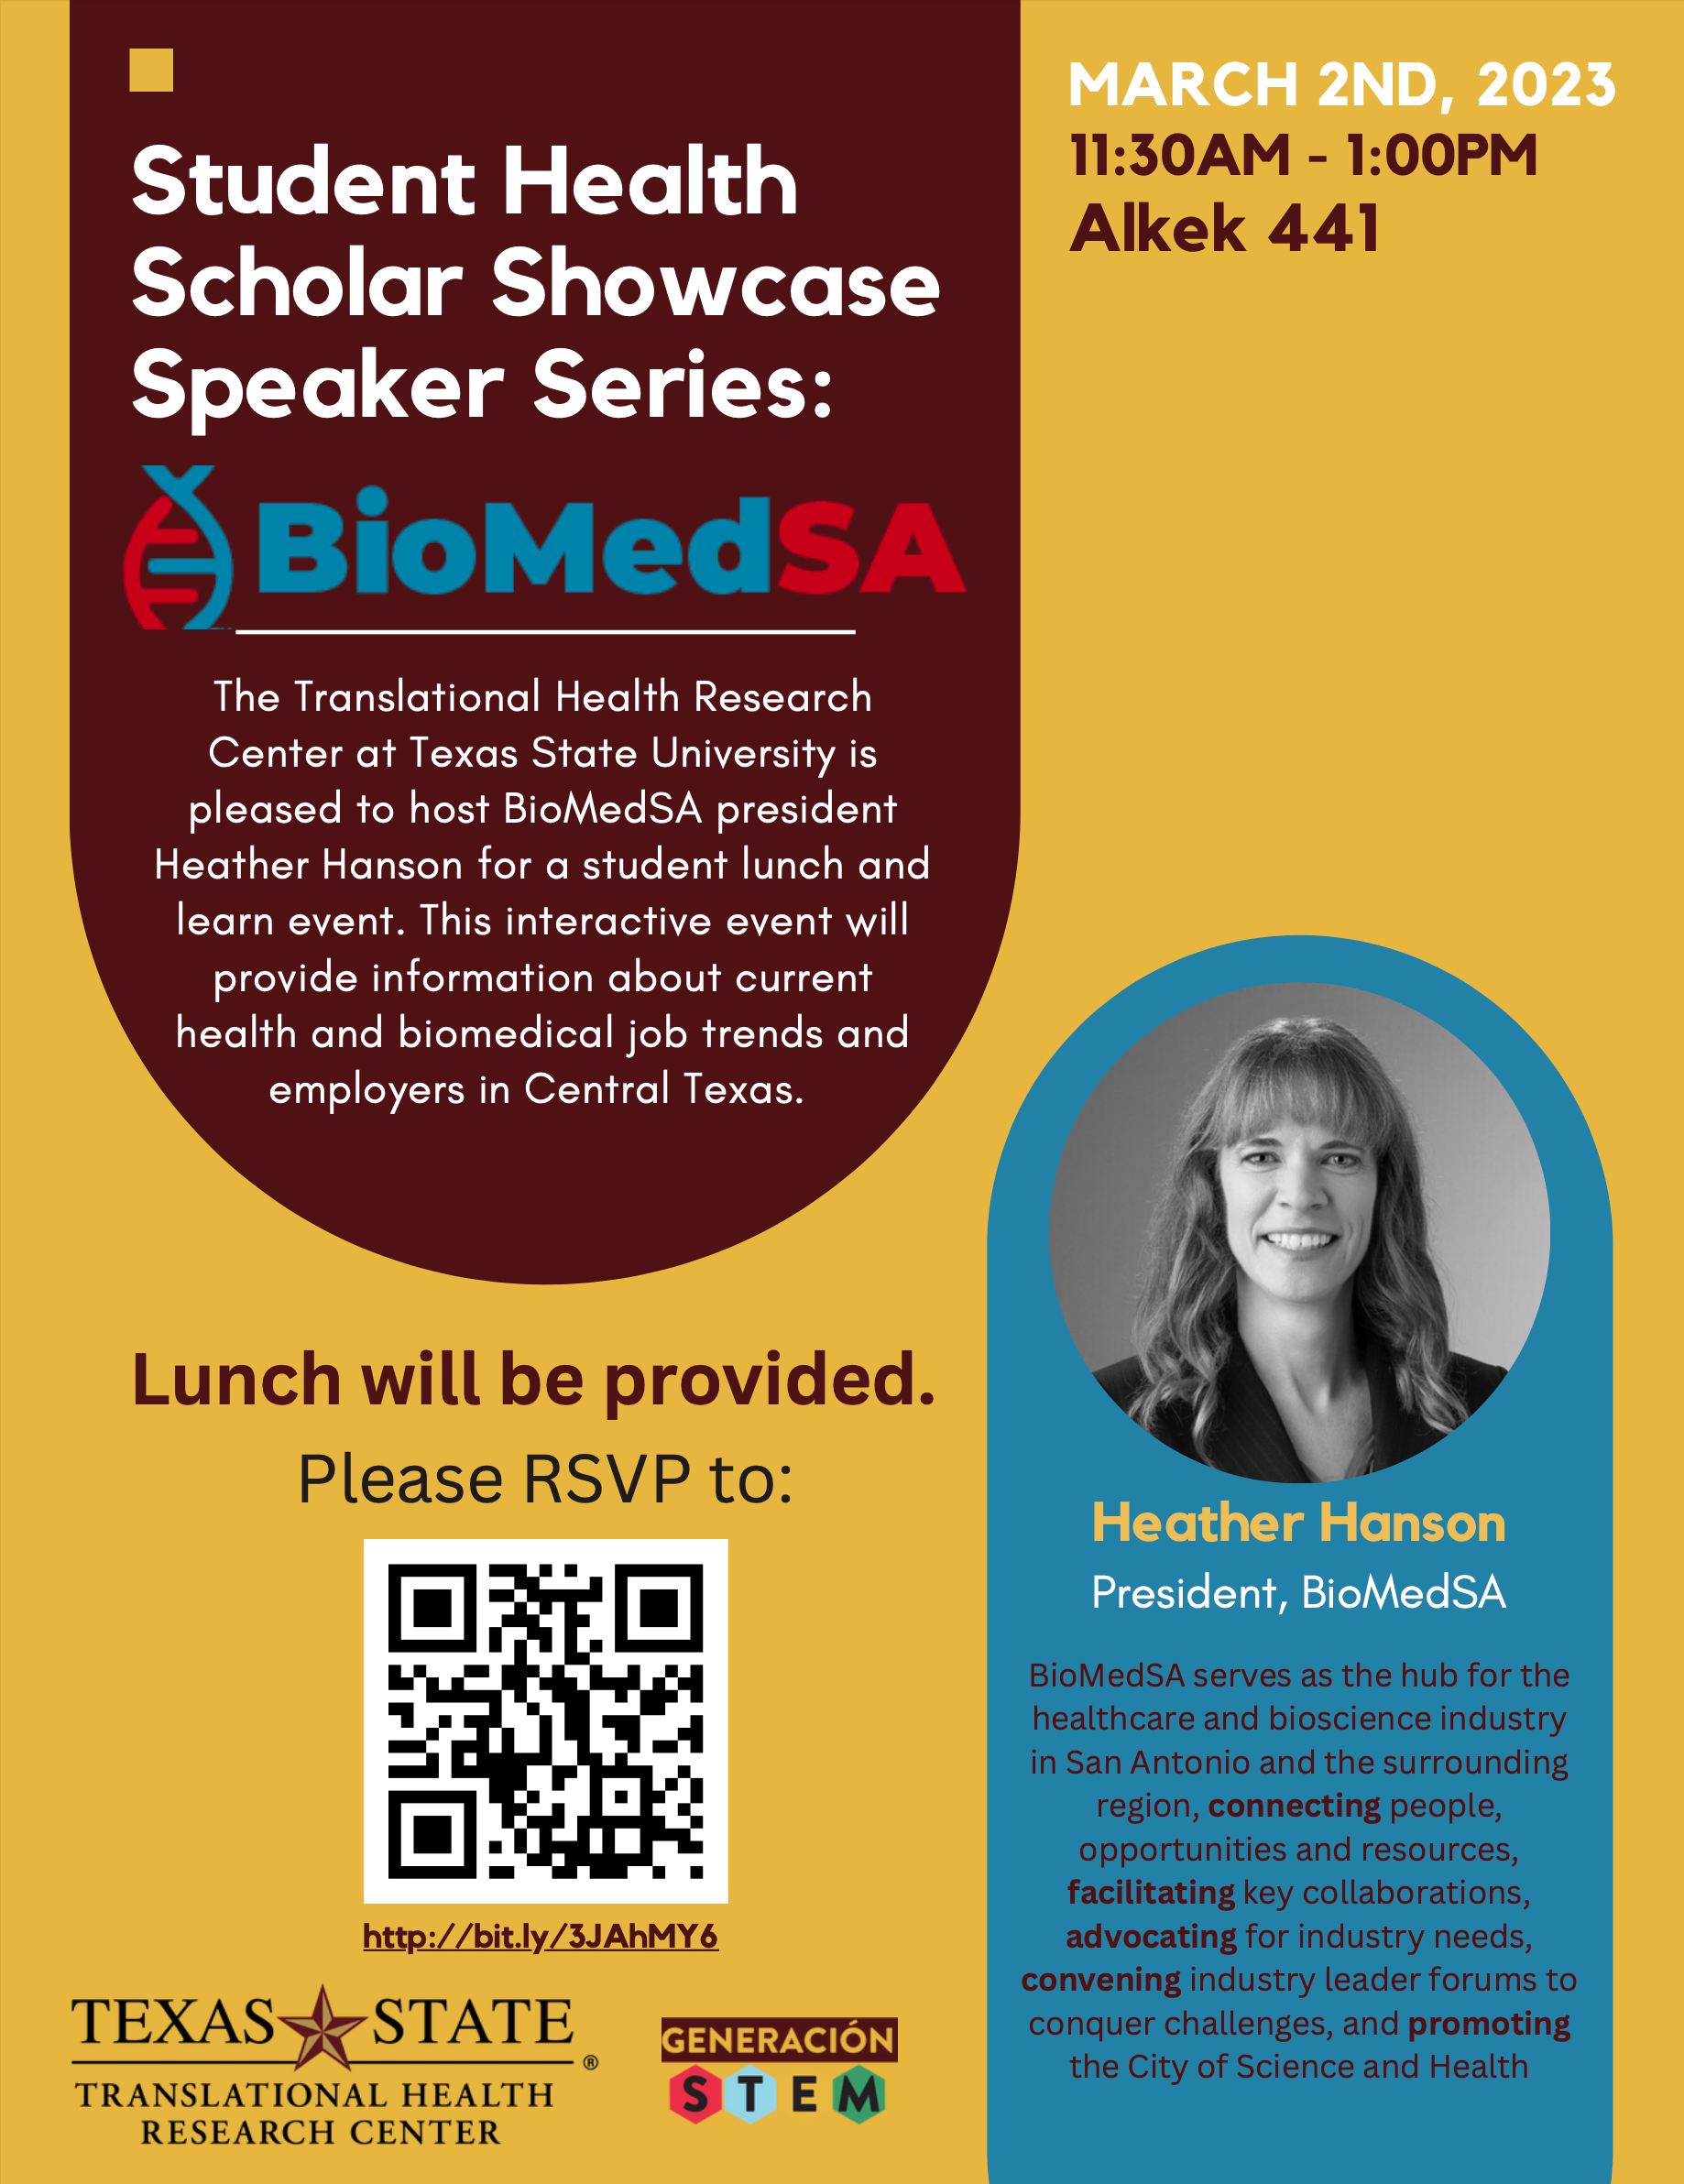 Student Health Scholar Showcase Speaker Series flyer (all info is in the text box to the left)